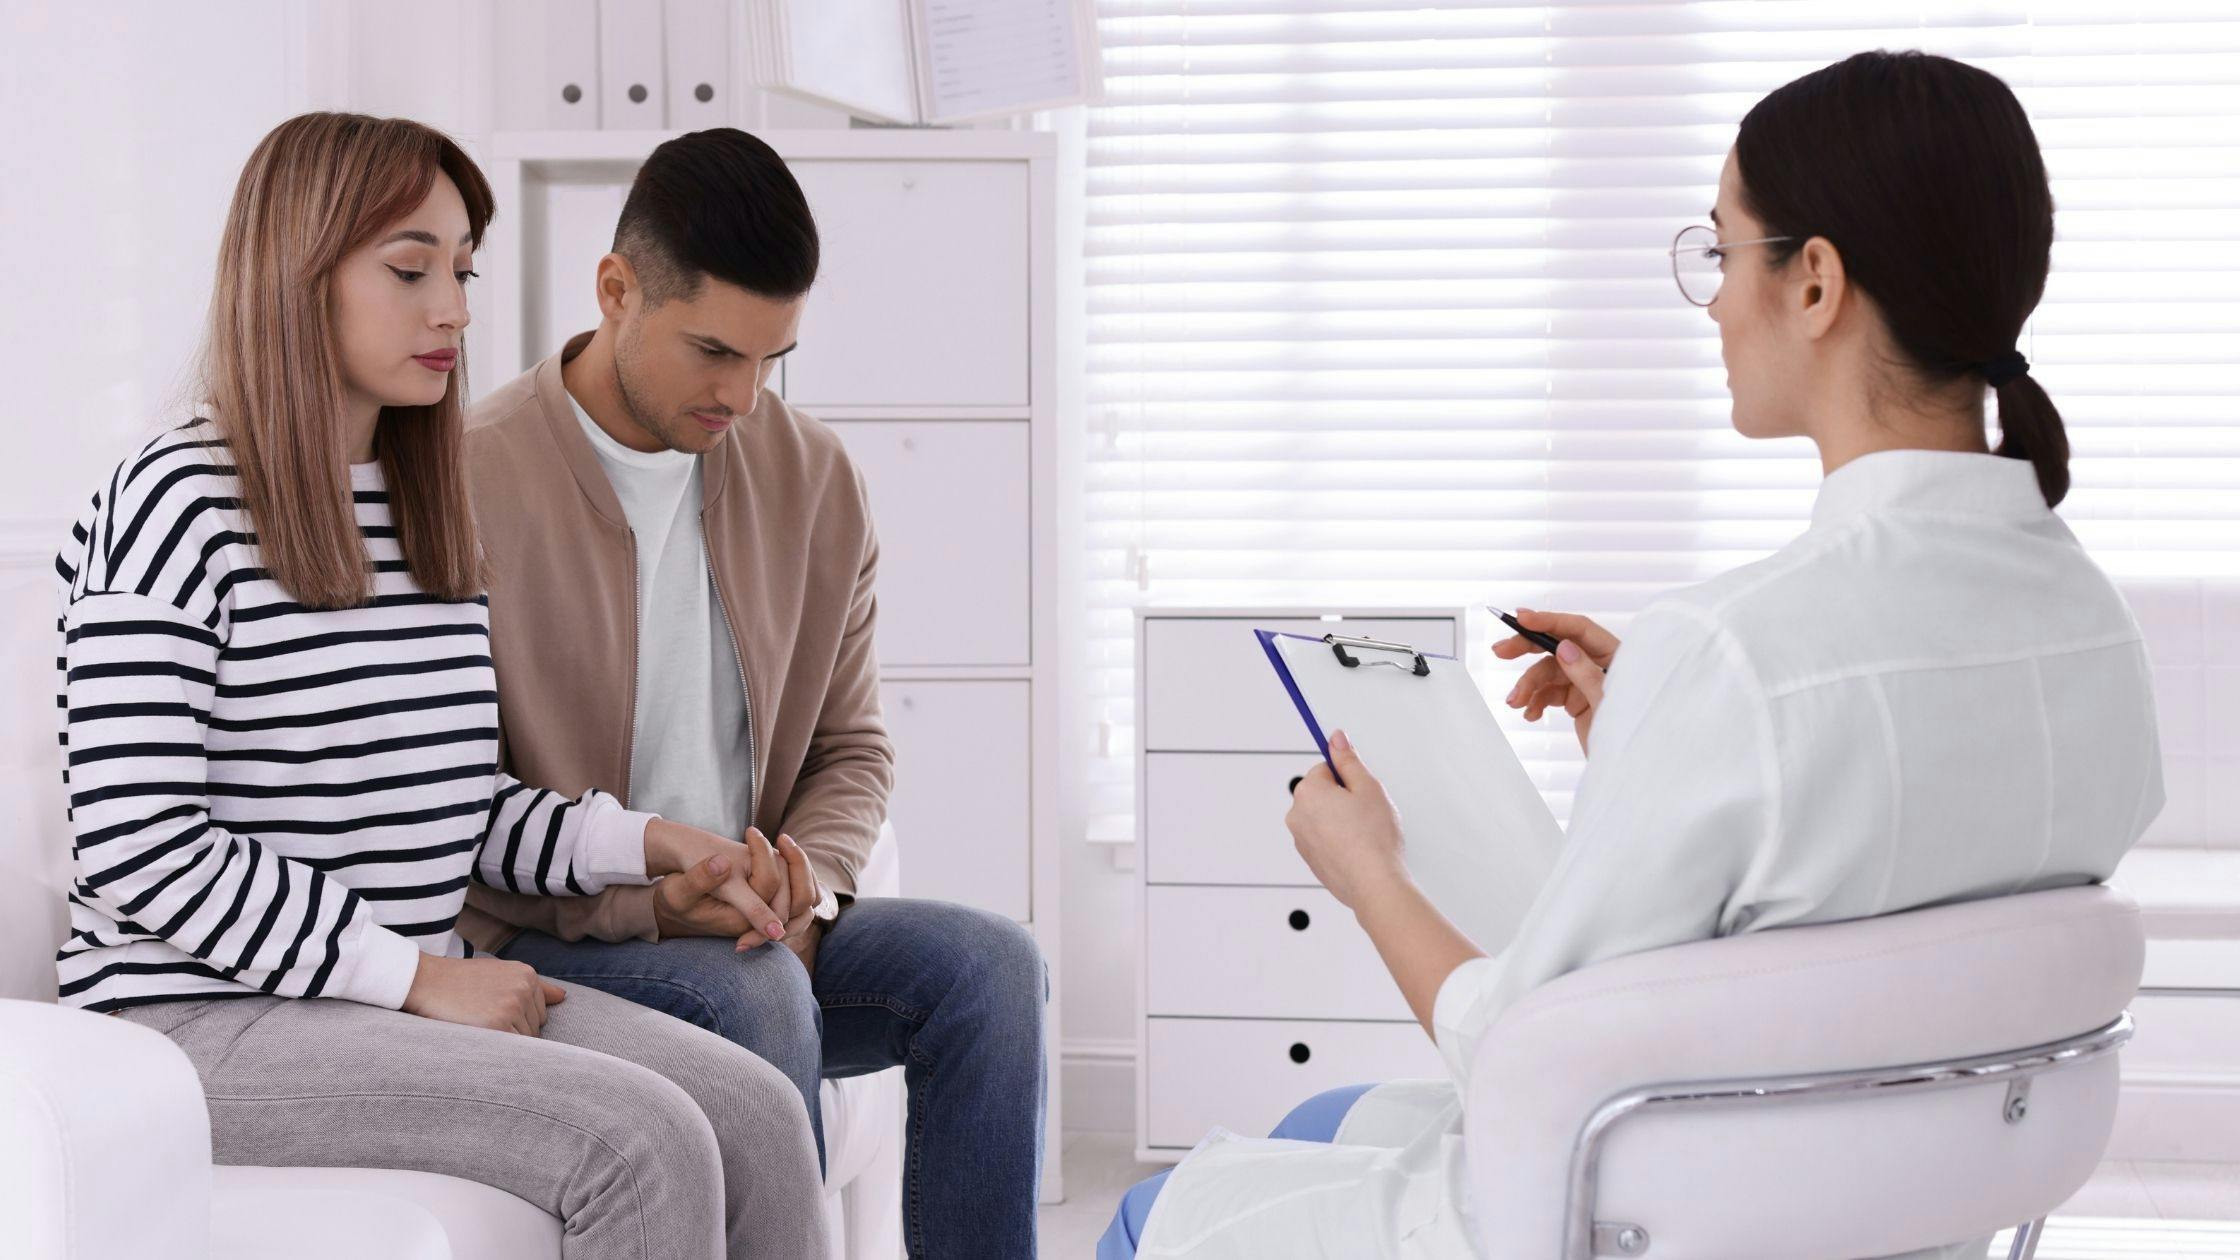 a pregnant woman is sitting next to a man and talking to a doctor .